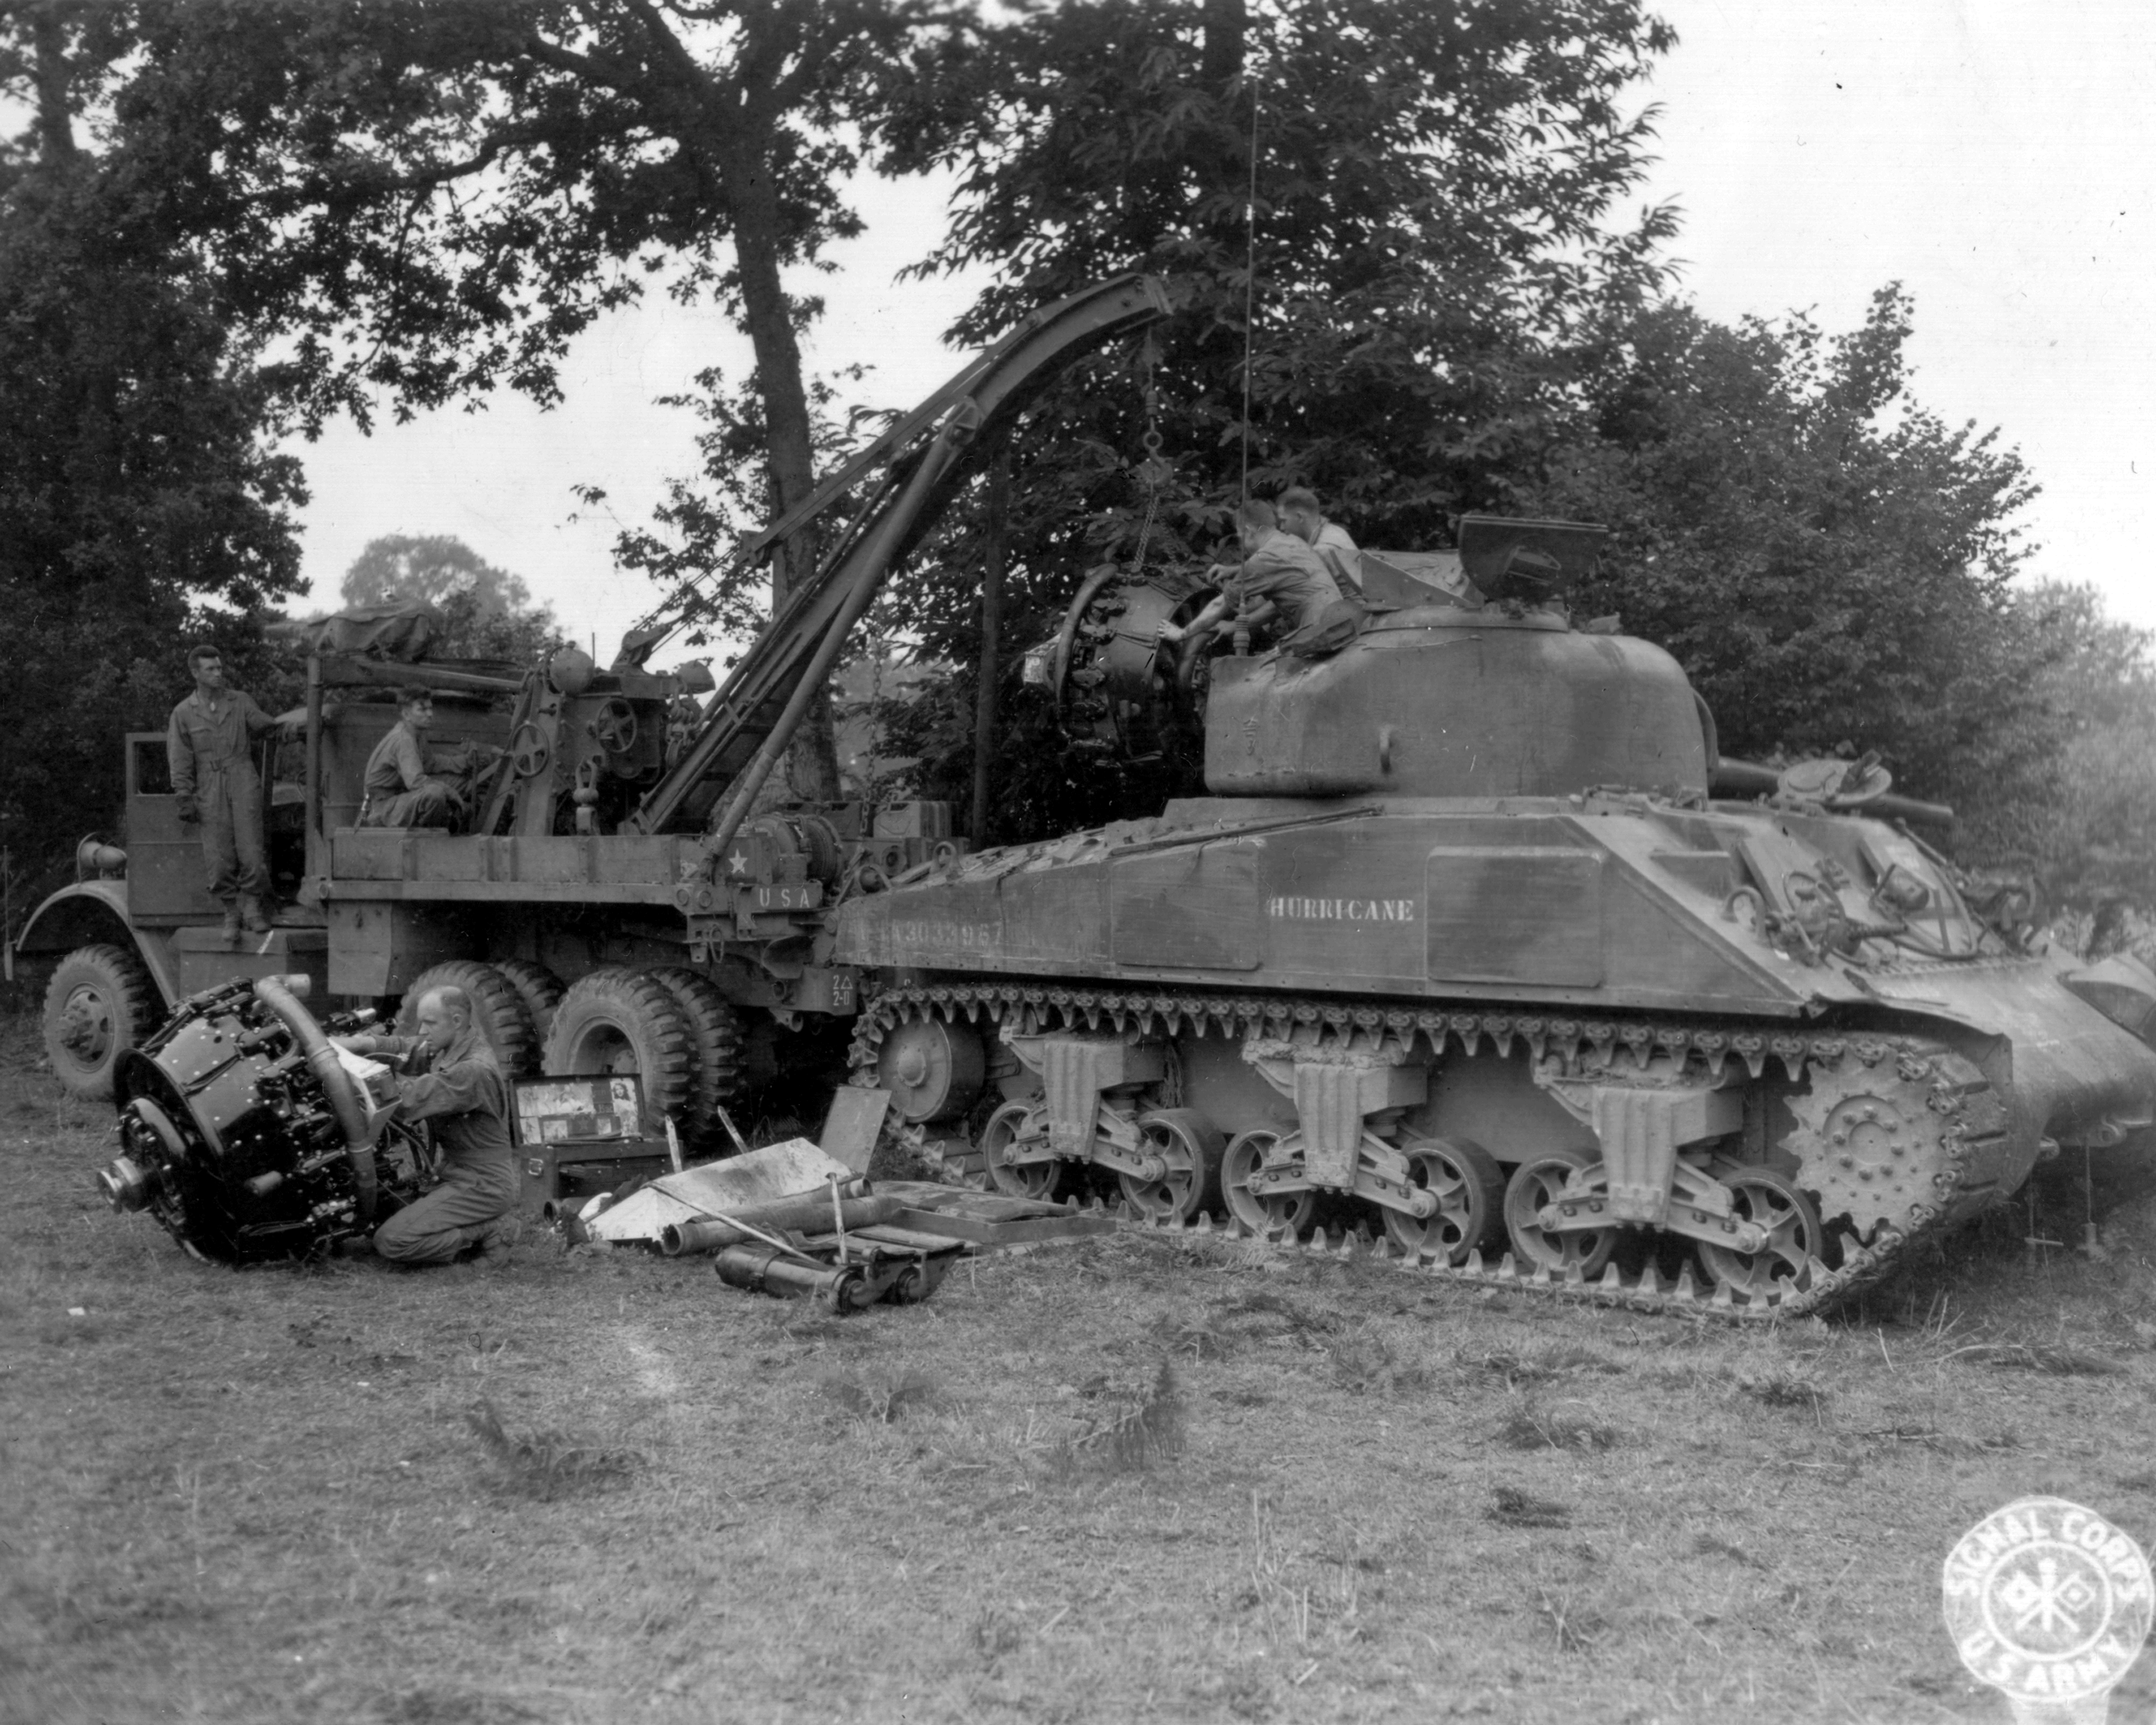 The Sherman Tank Site | The Place For All Things Sherman Tank